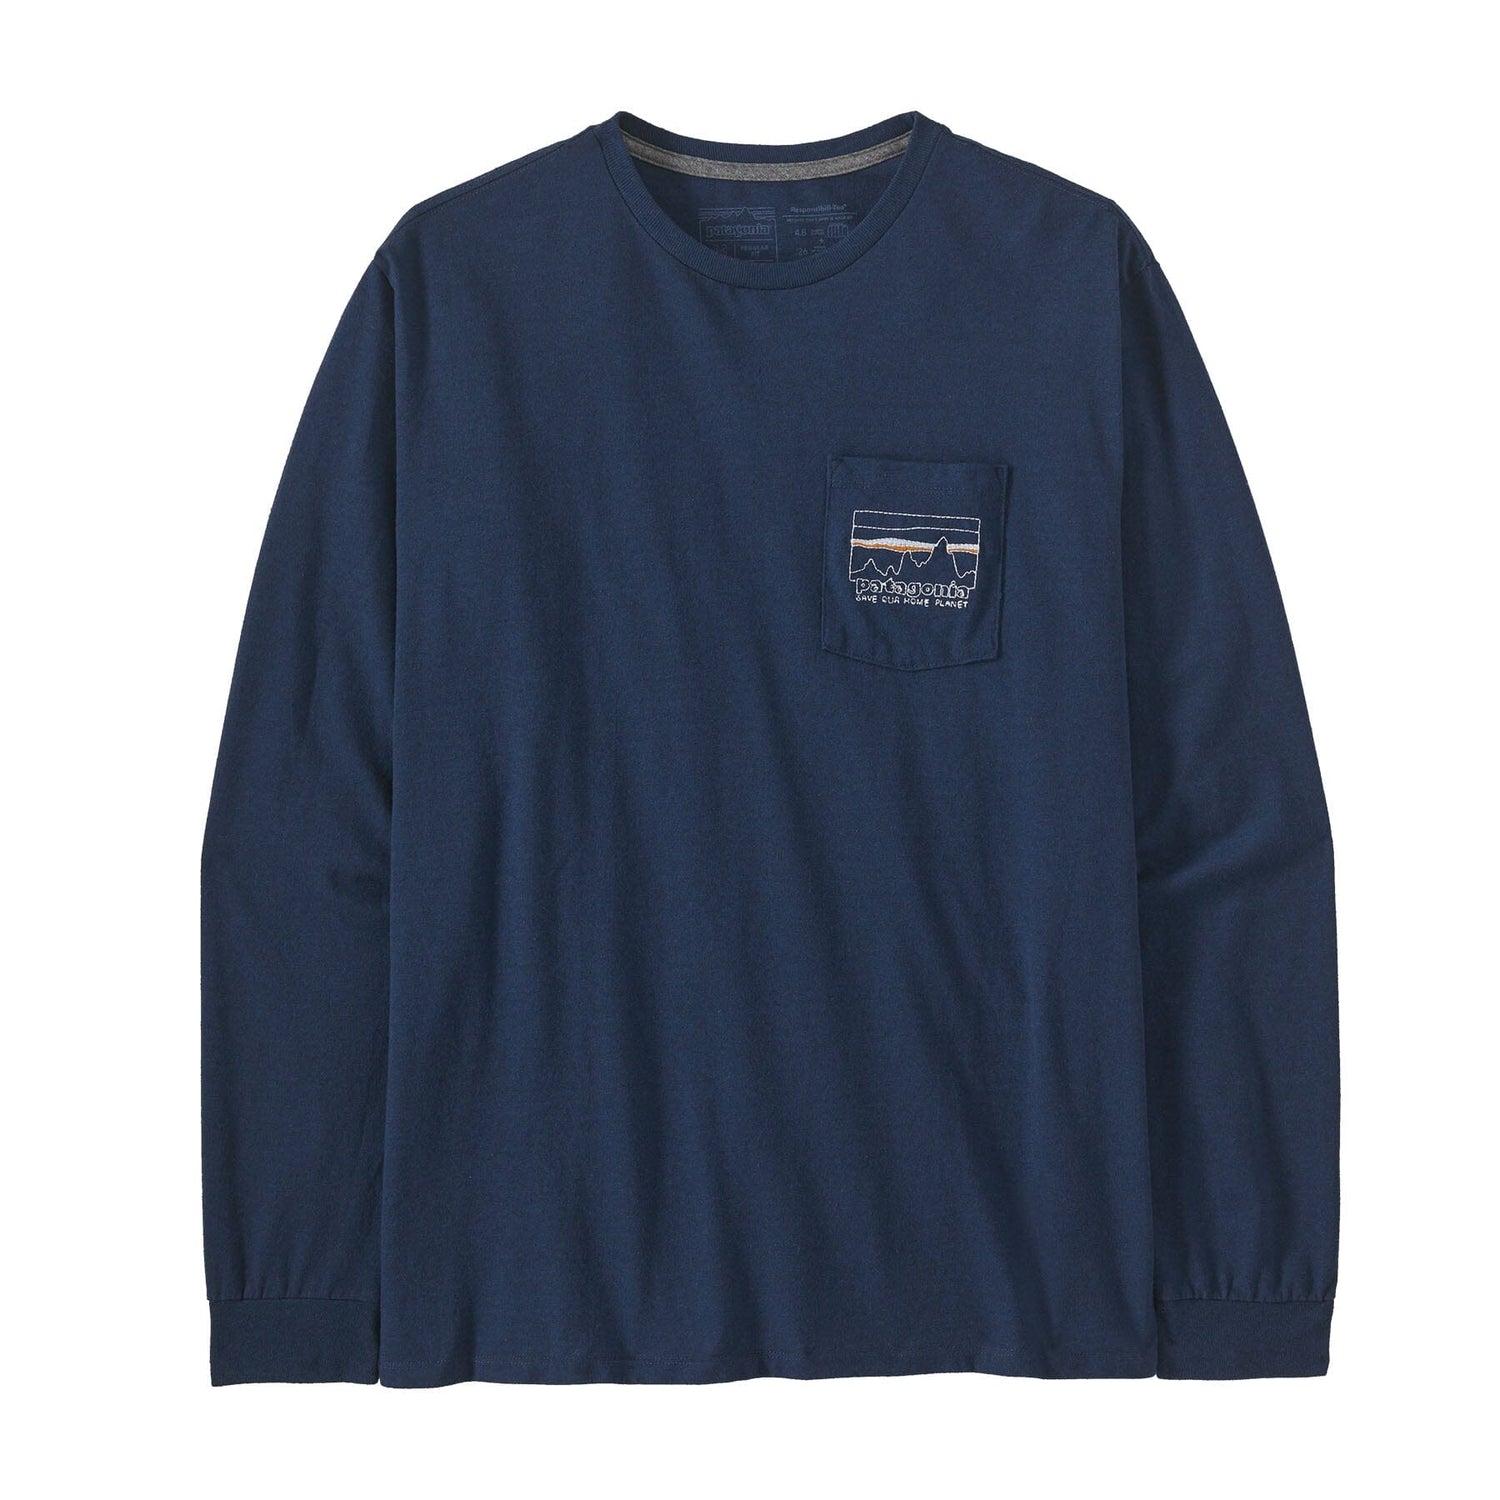 Patagonia M's L/S '73 Skyline Pocket Responsibili-Tee - Recycled Cotton & Recycled PET Lagom Blue Shirt